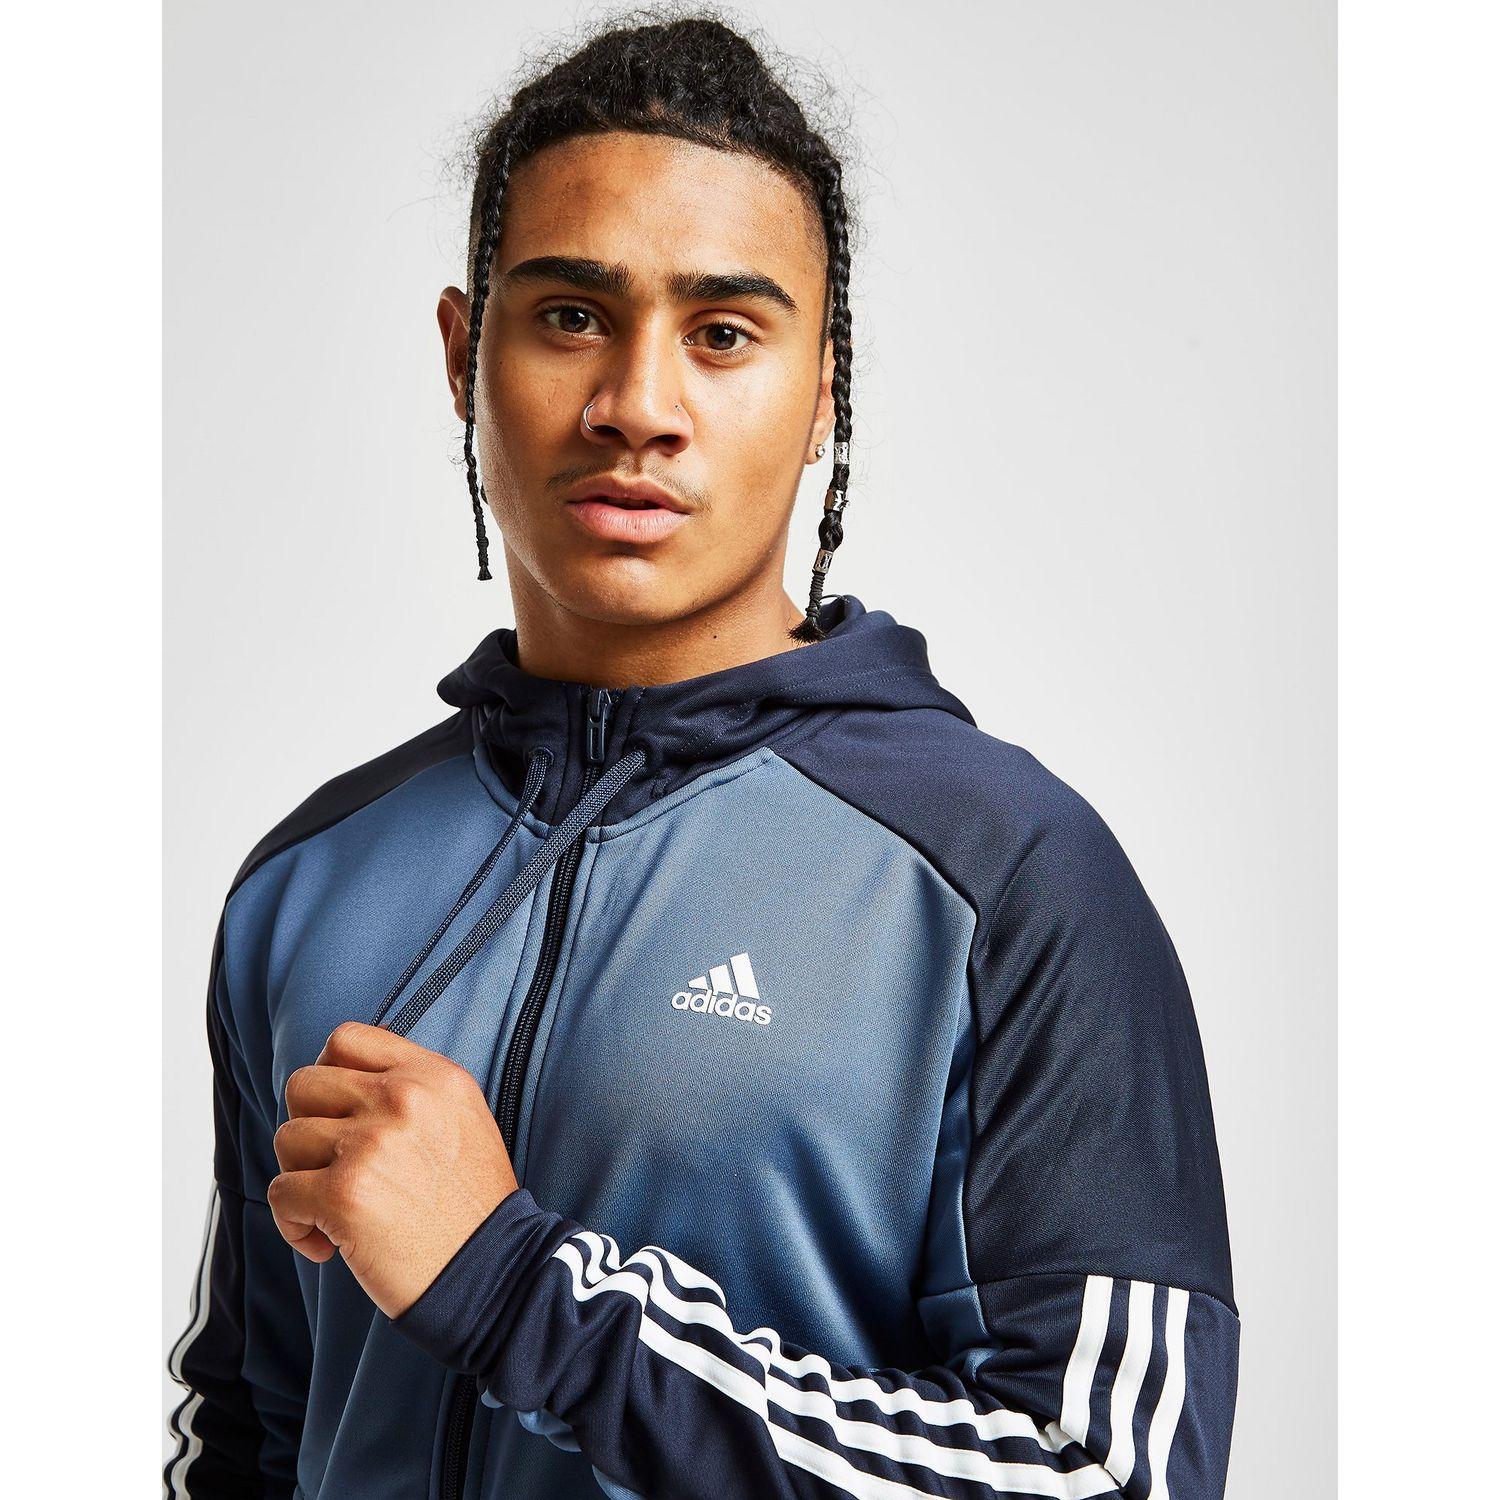 adidas game time tracksuit, Off 66%, www.scrimaglio.com